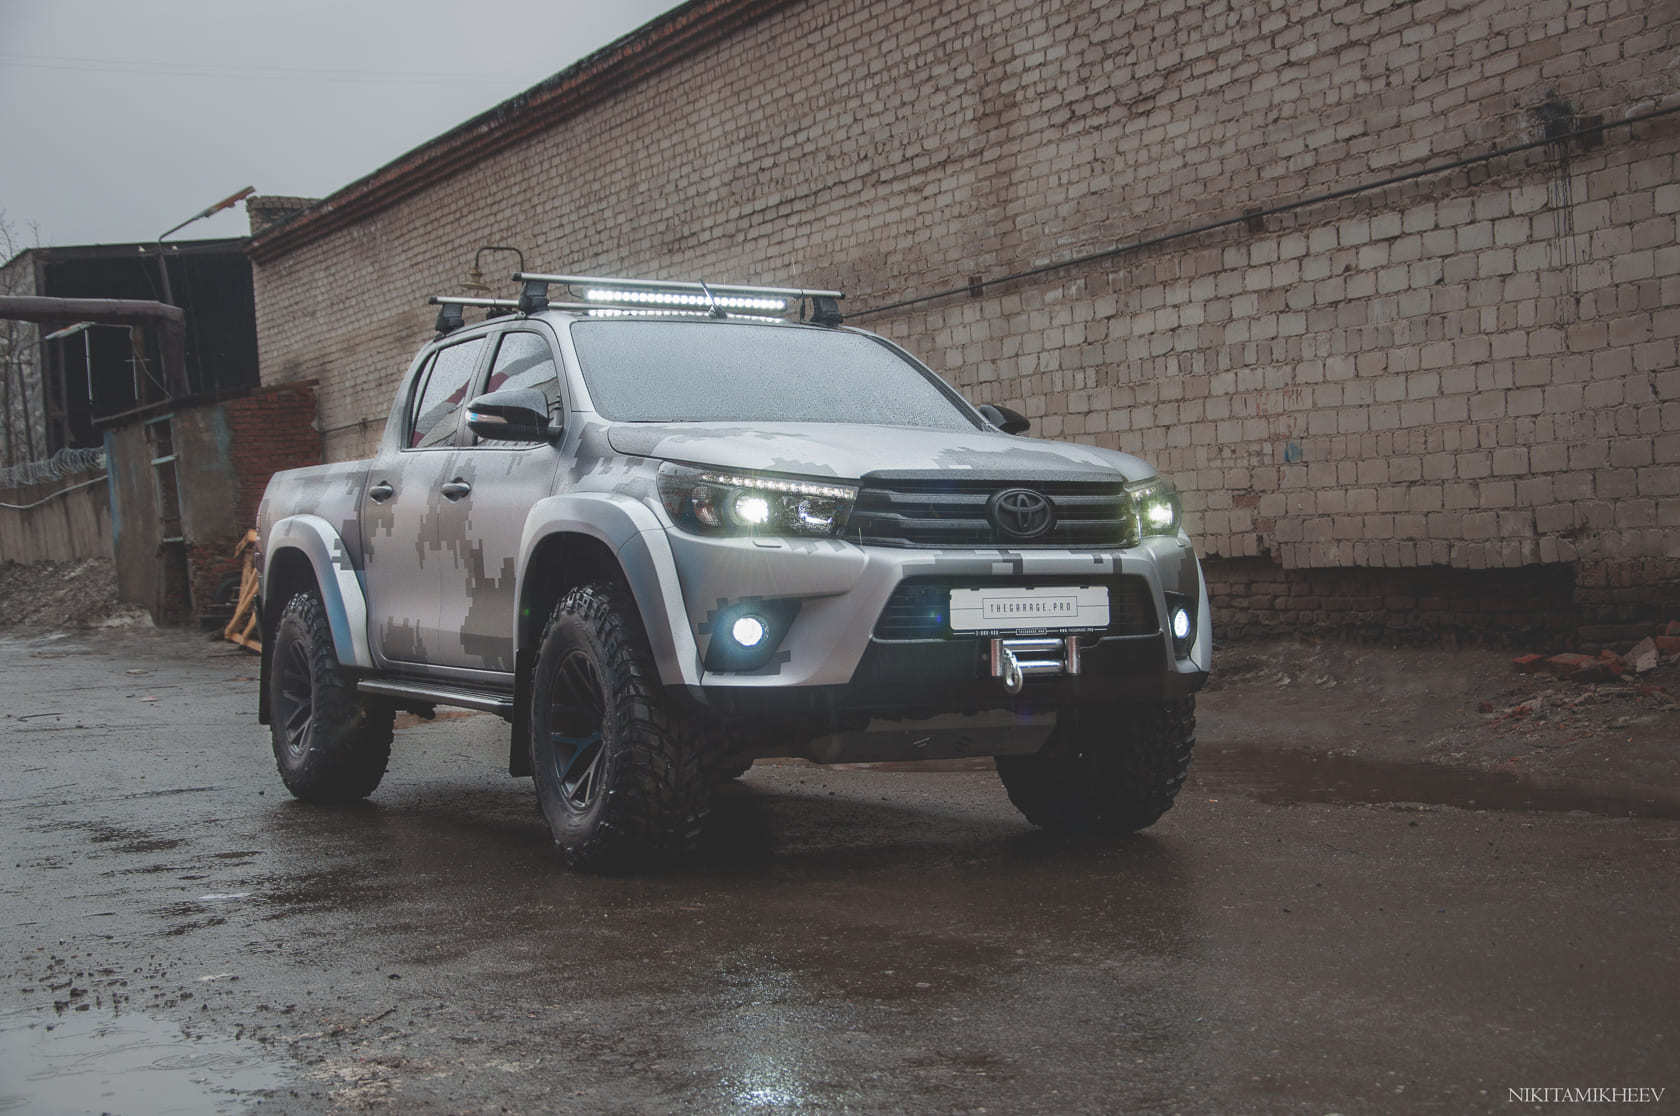 Toyota Hilux Pickup 2016 Tuning